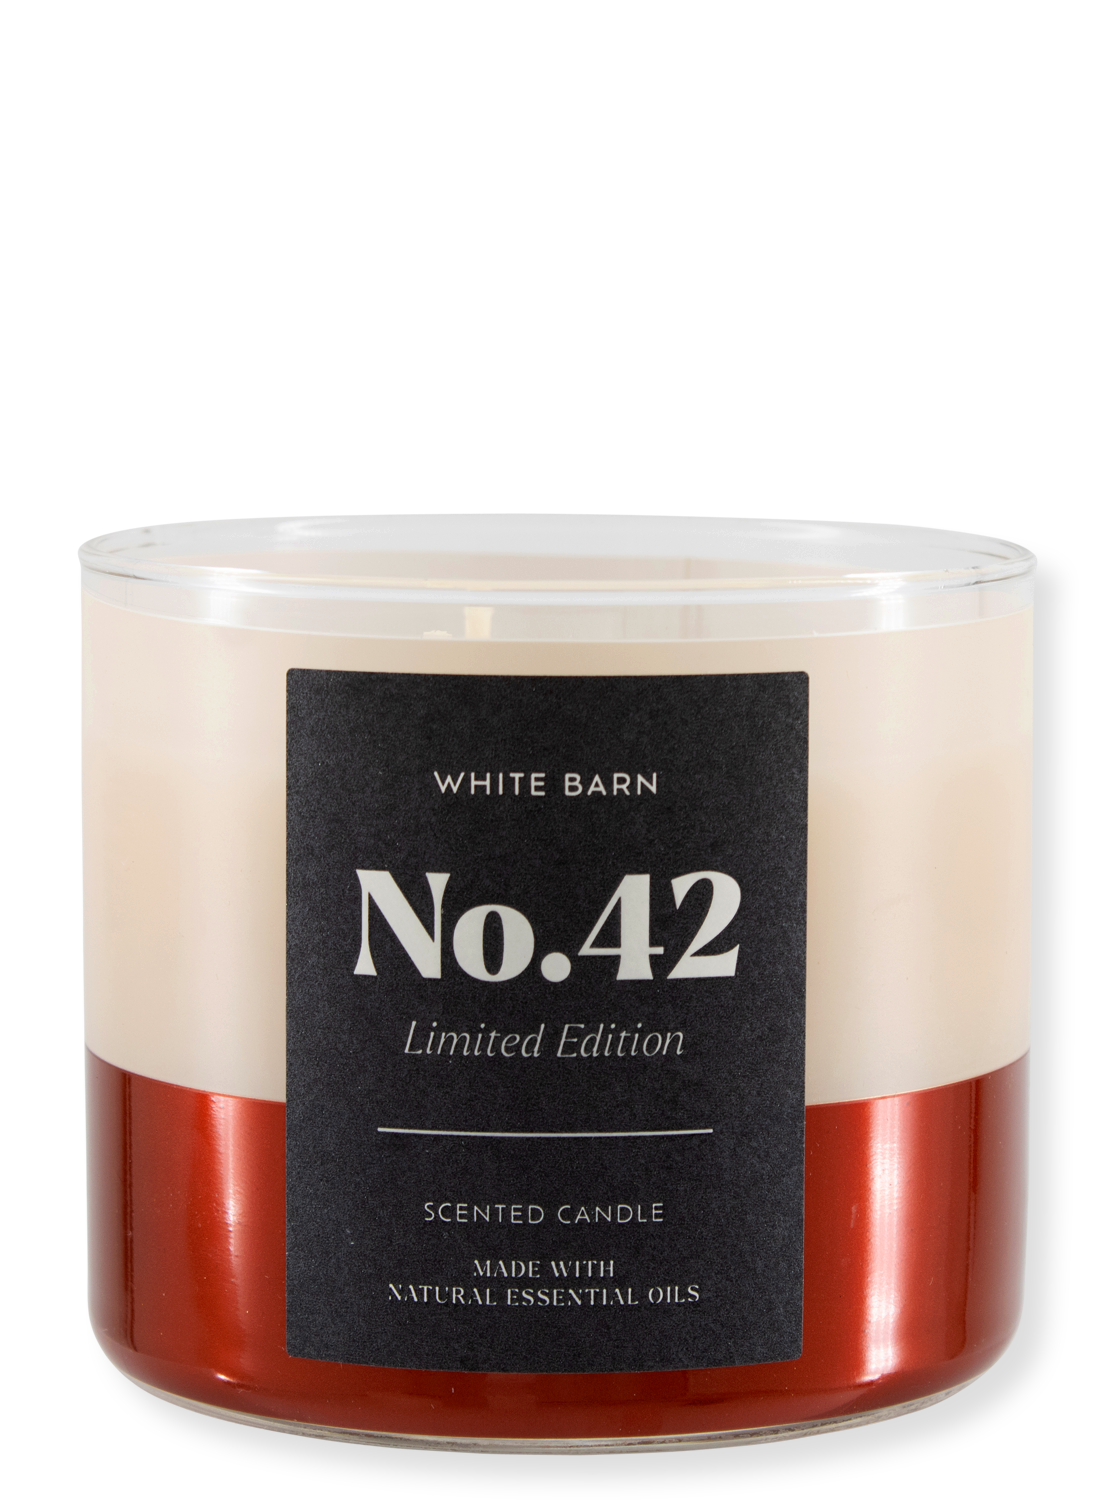 3 -DOUCHT Candle - No.42 Vintage Memories - Limited Edition - 411G